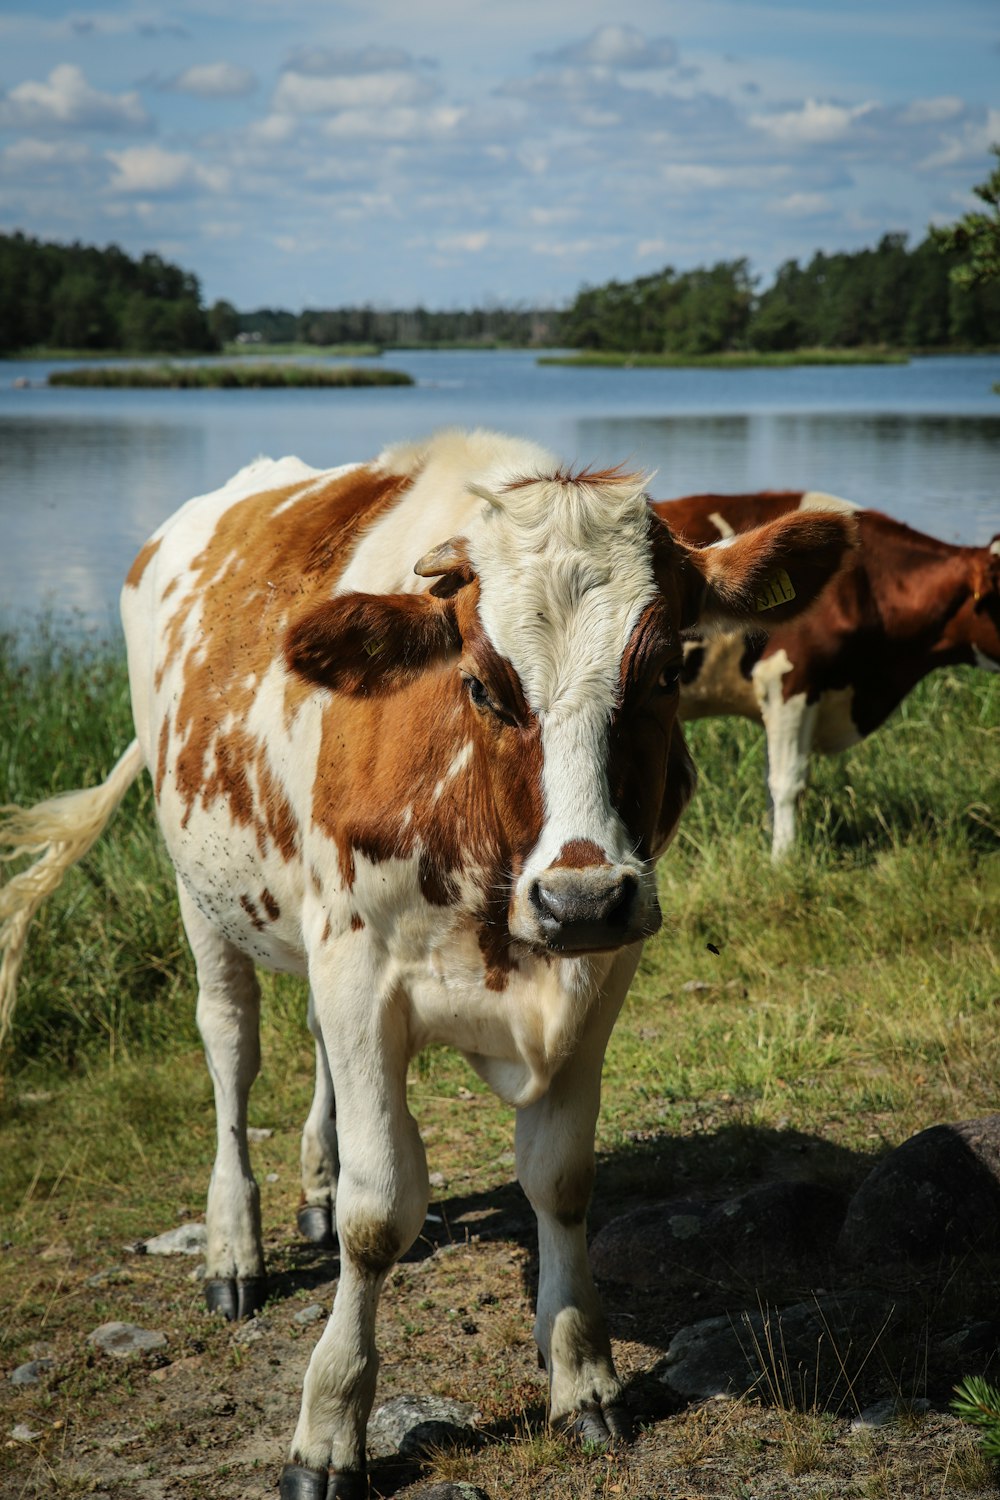 brown and white cow on green grass field near body of water during daytime